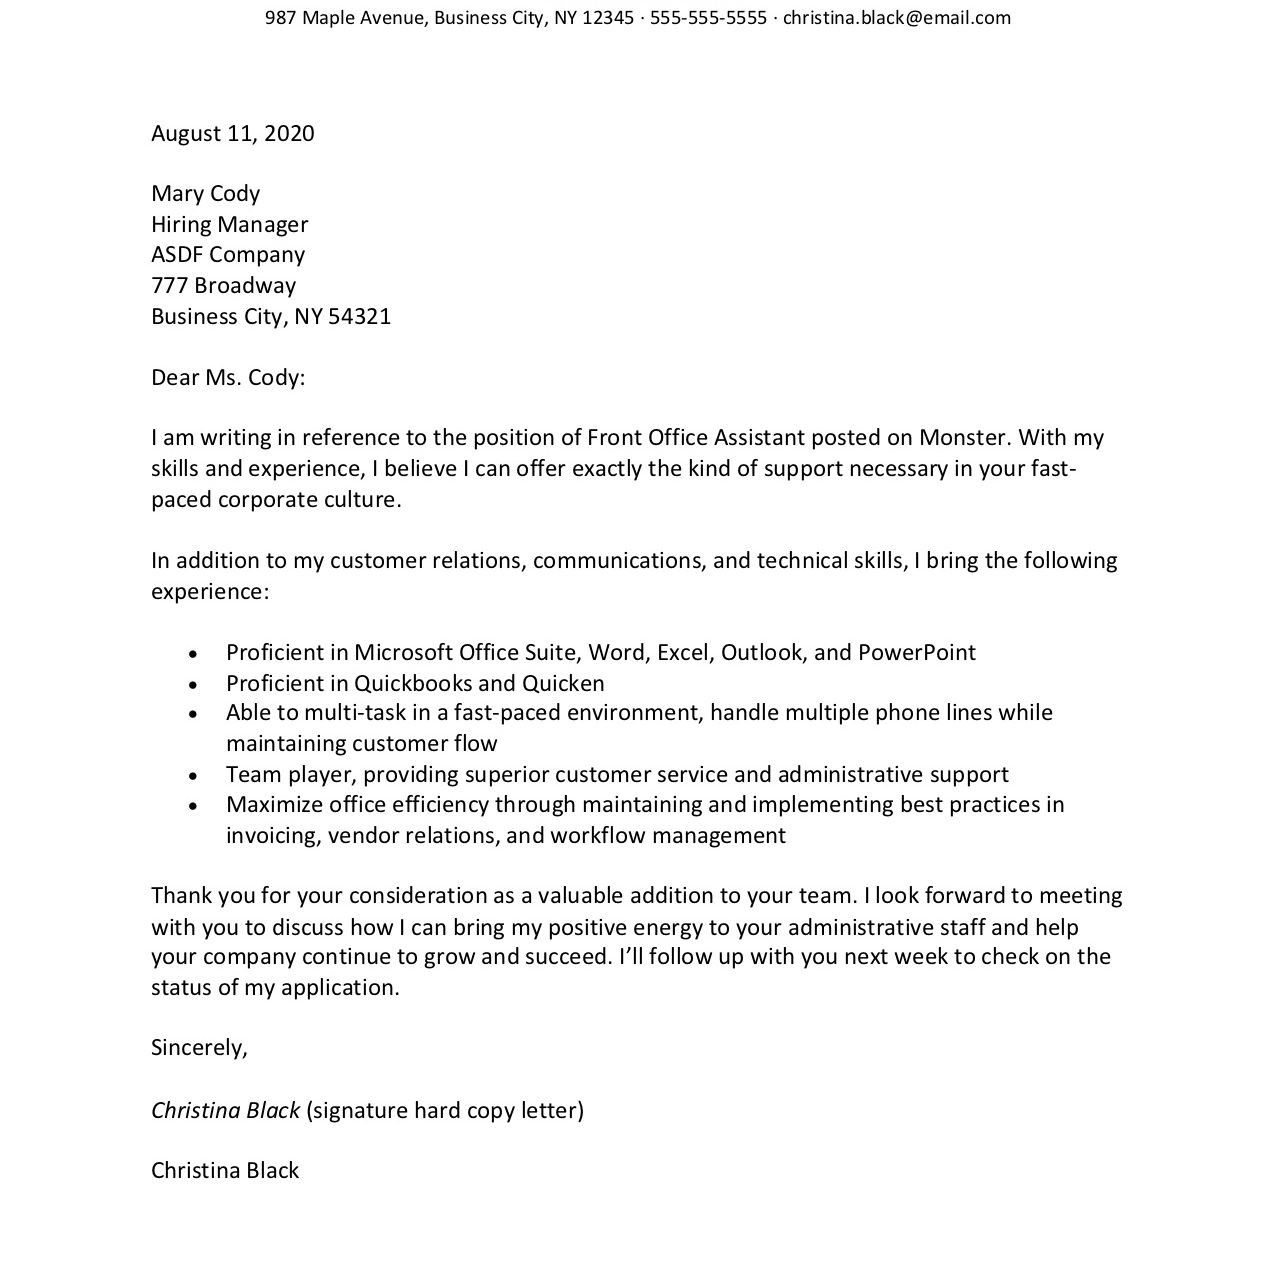 Sample Of Resume Letter for Applying A Job Job Application Letter Template and Writing Tips